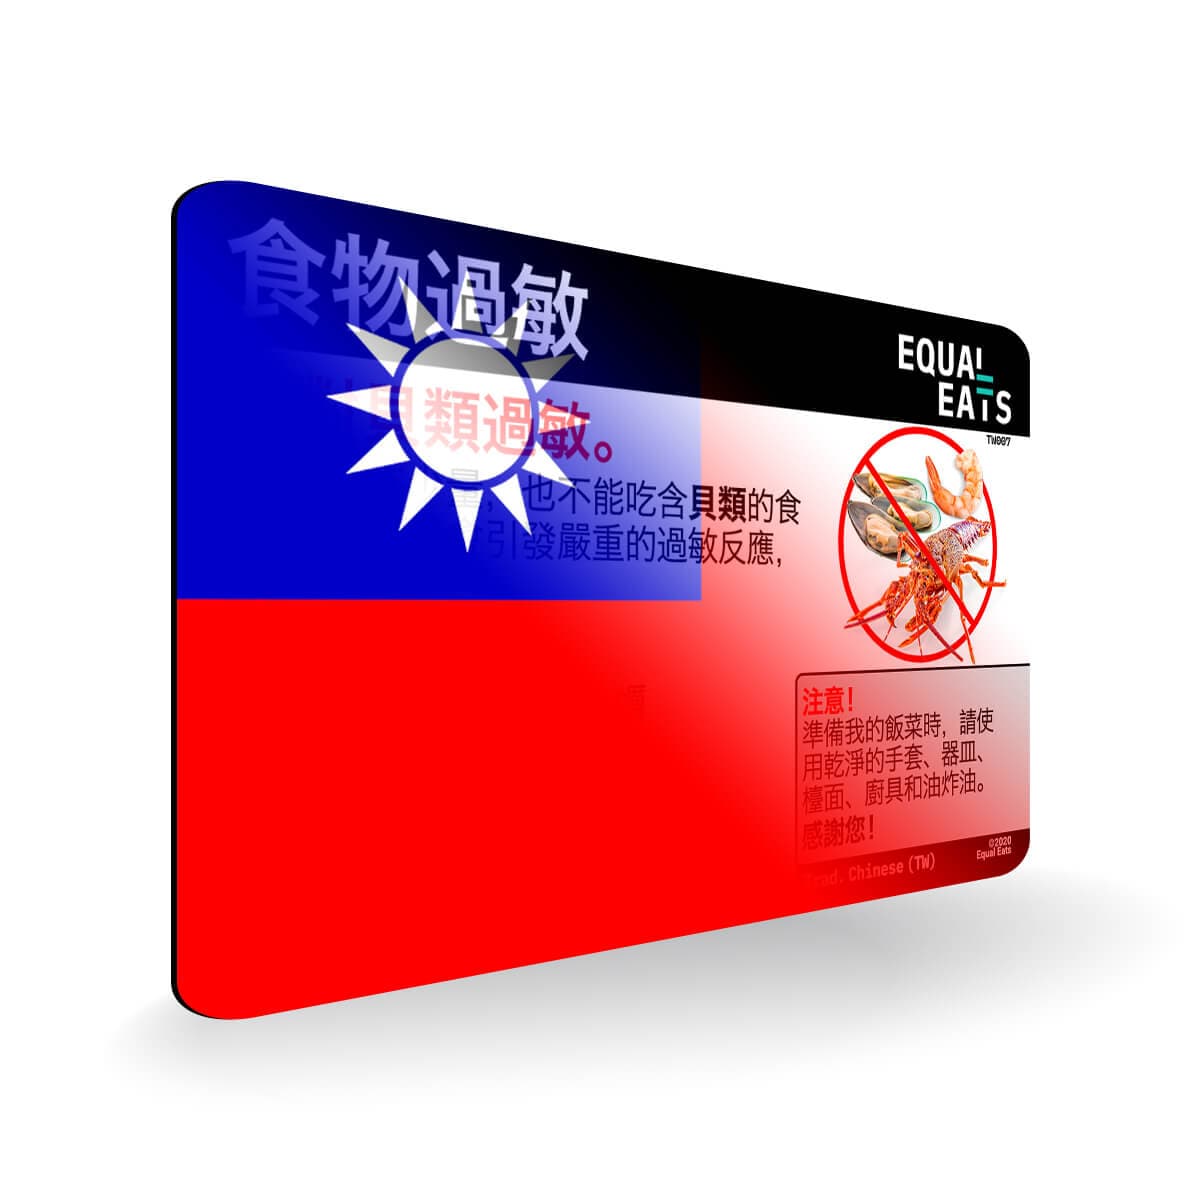 Shellfish Allergy in Traditional Chinese. Shellfish Allergy Card for Taiwan